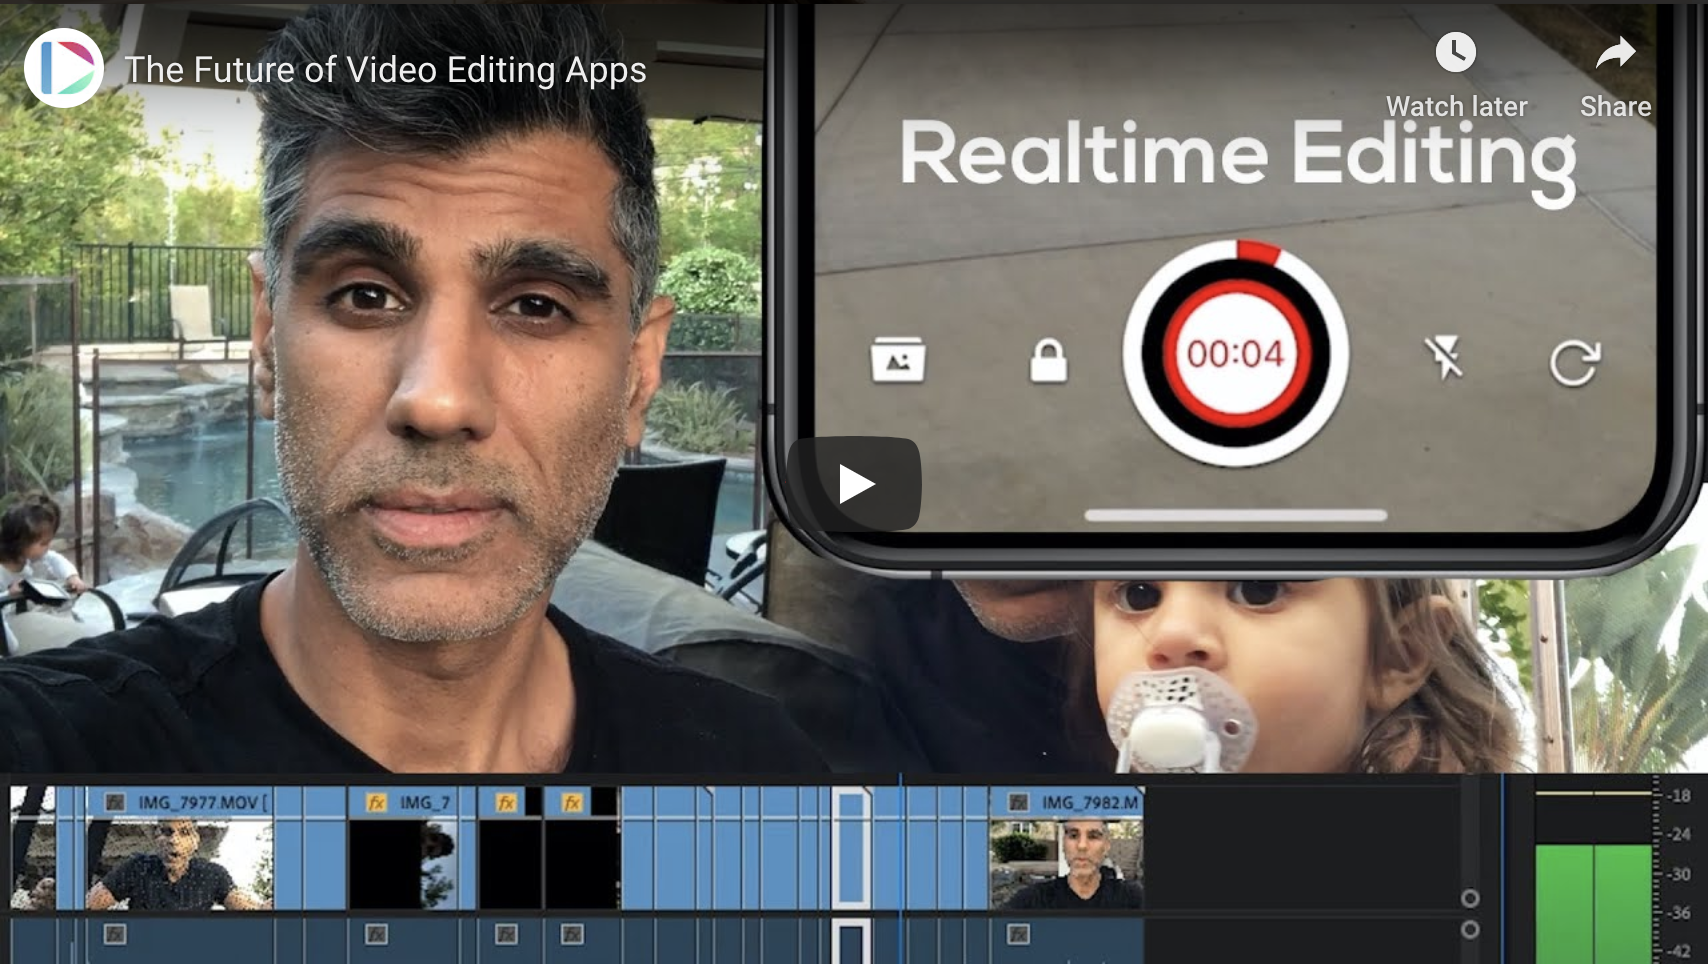 The Future of Video Editing Apps